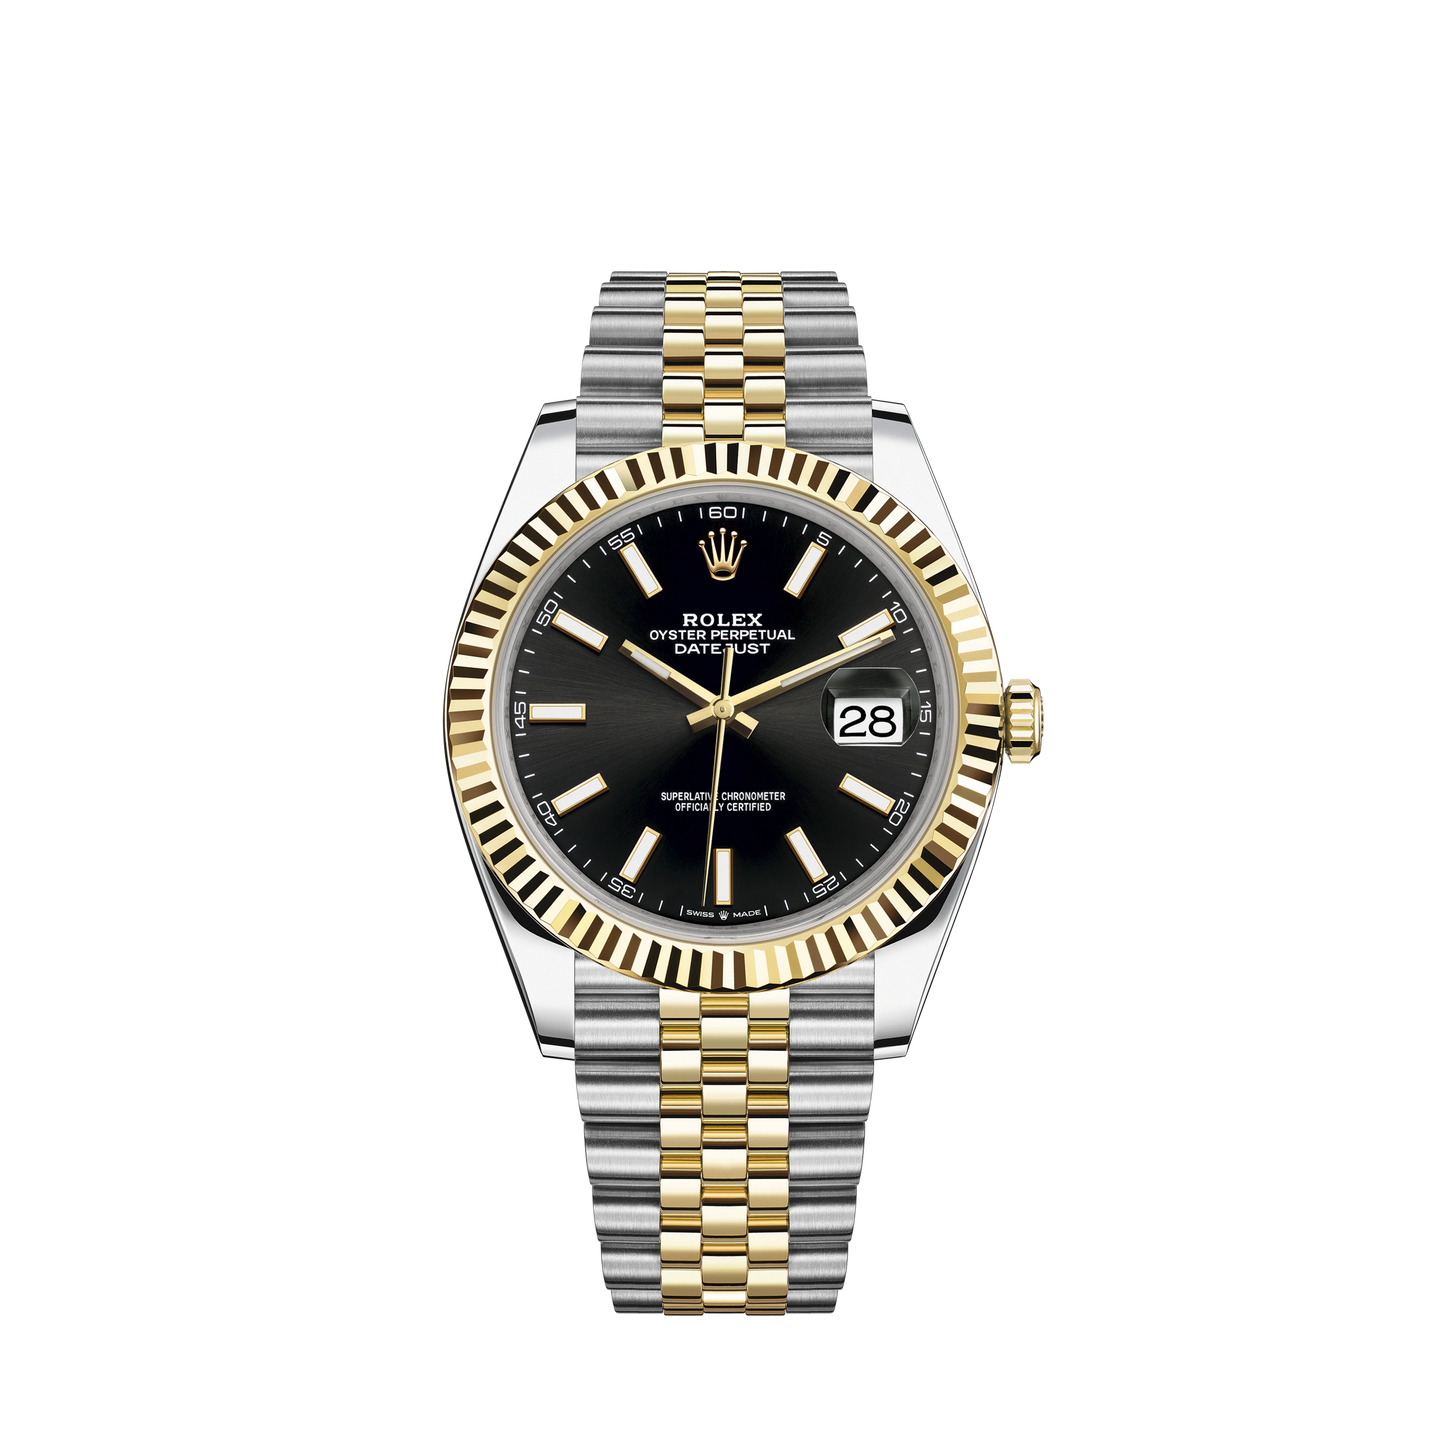 Datejust 41 41mm Jubilee Bracelet Oystersteel and Yellow Gold with Bright Black Dial Fluted Bezel